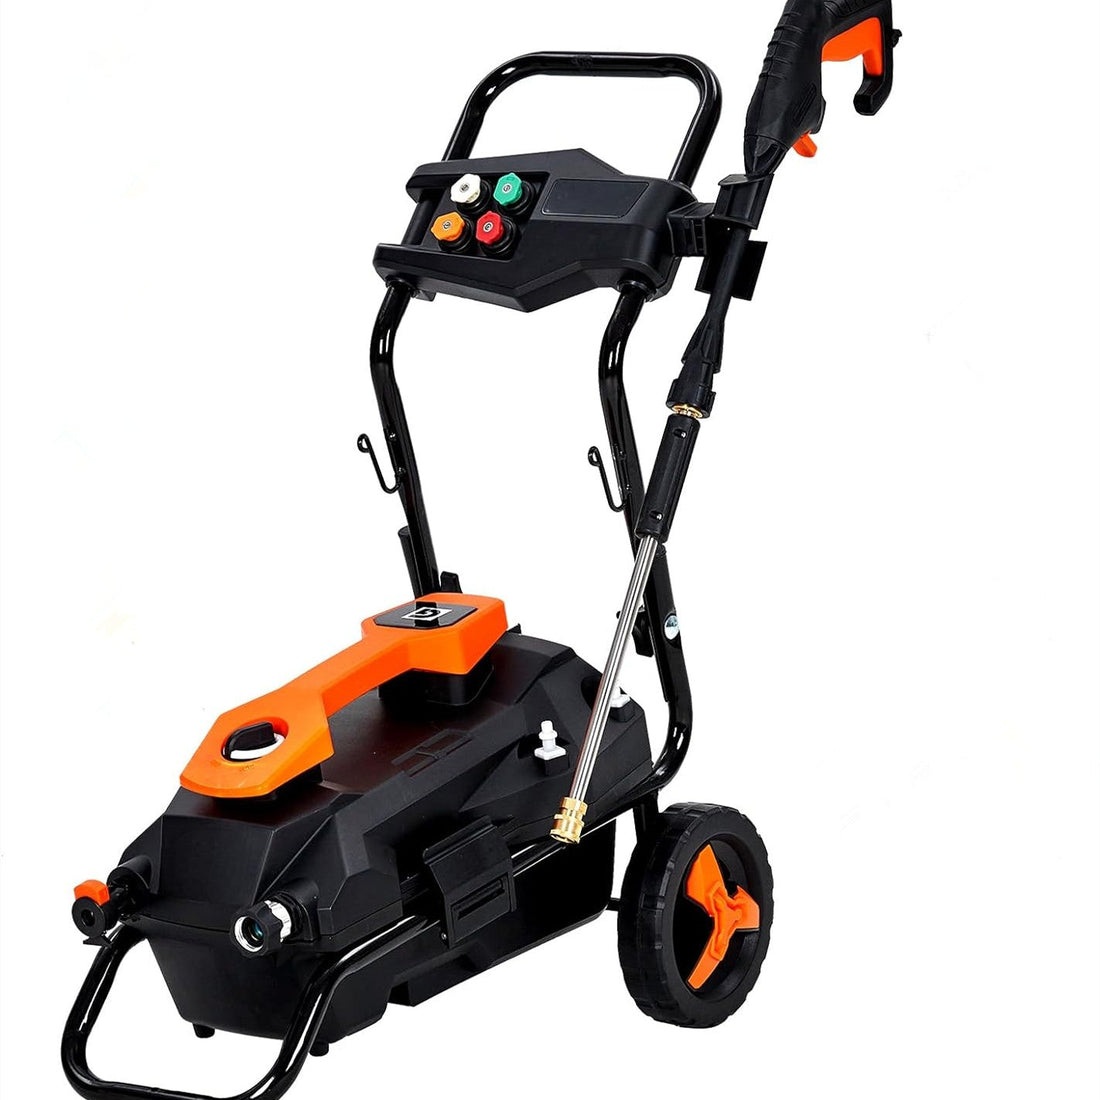 1950 PSI (1.5 GPM) Electric Pressure Washer, 1500w Water-Cooled Induction Motor, 400ML Soap Tank, Clean Machine with 25 FT Hose/35 FT Power Cord, Great for Cars, Fences, Patios, Driveways